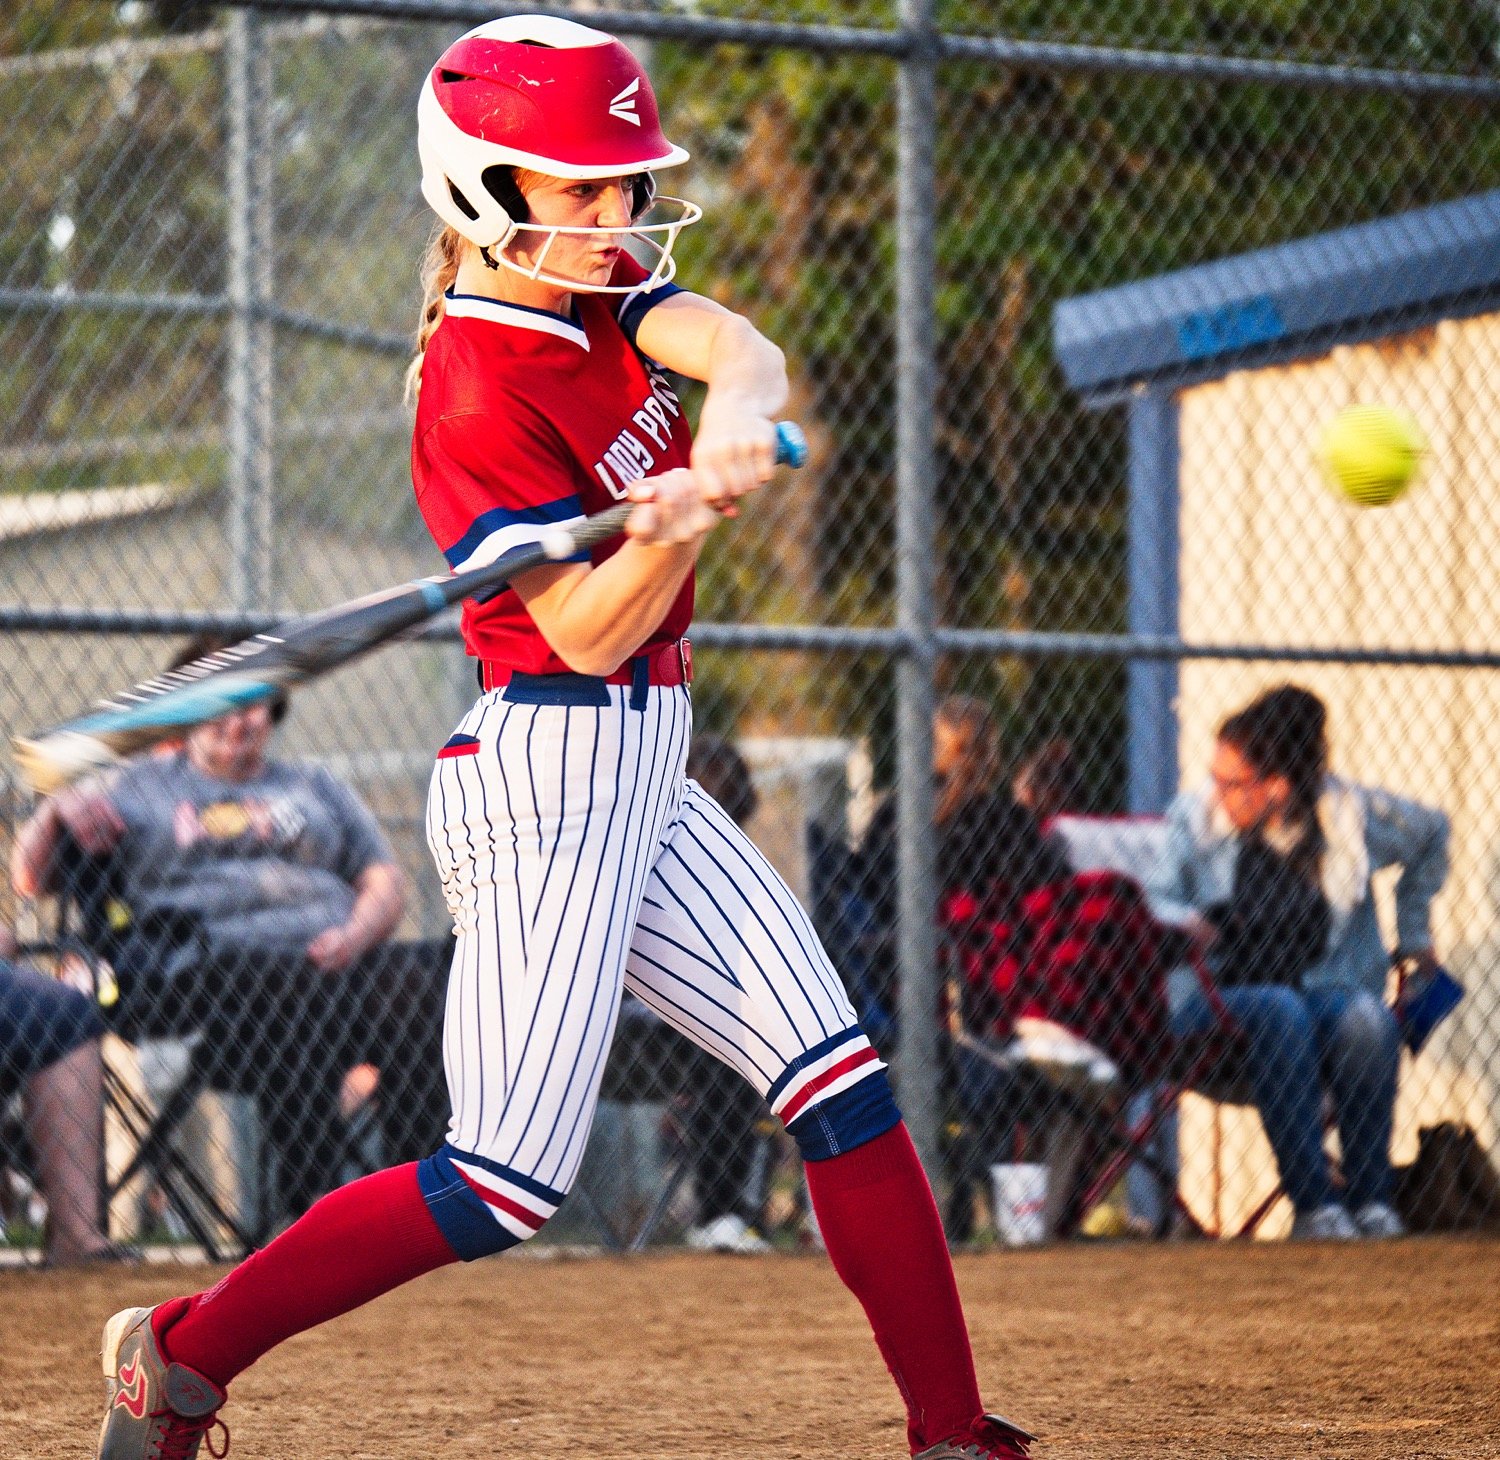 Cacie Lennon squares the bat up for one of her two hits against Fruitvale.